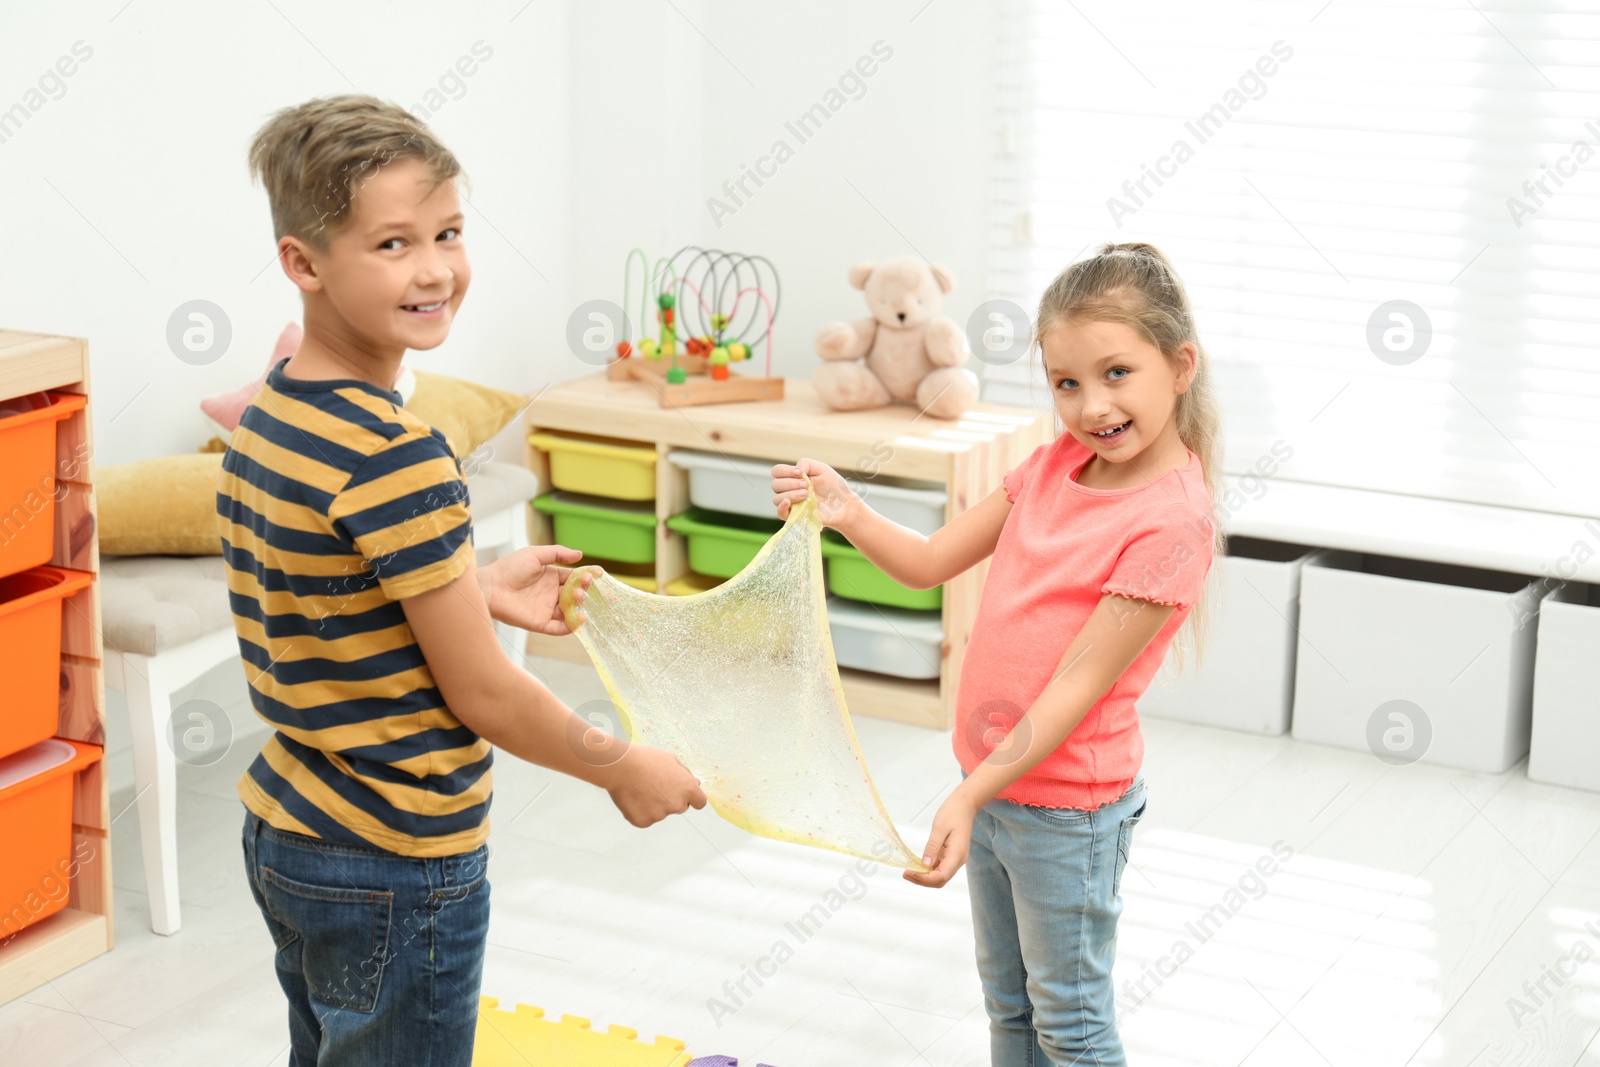 Photo of Happy children playing with slime in room